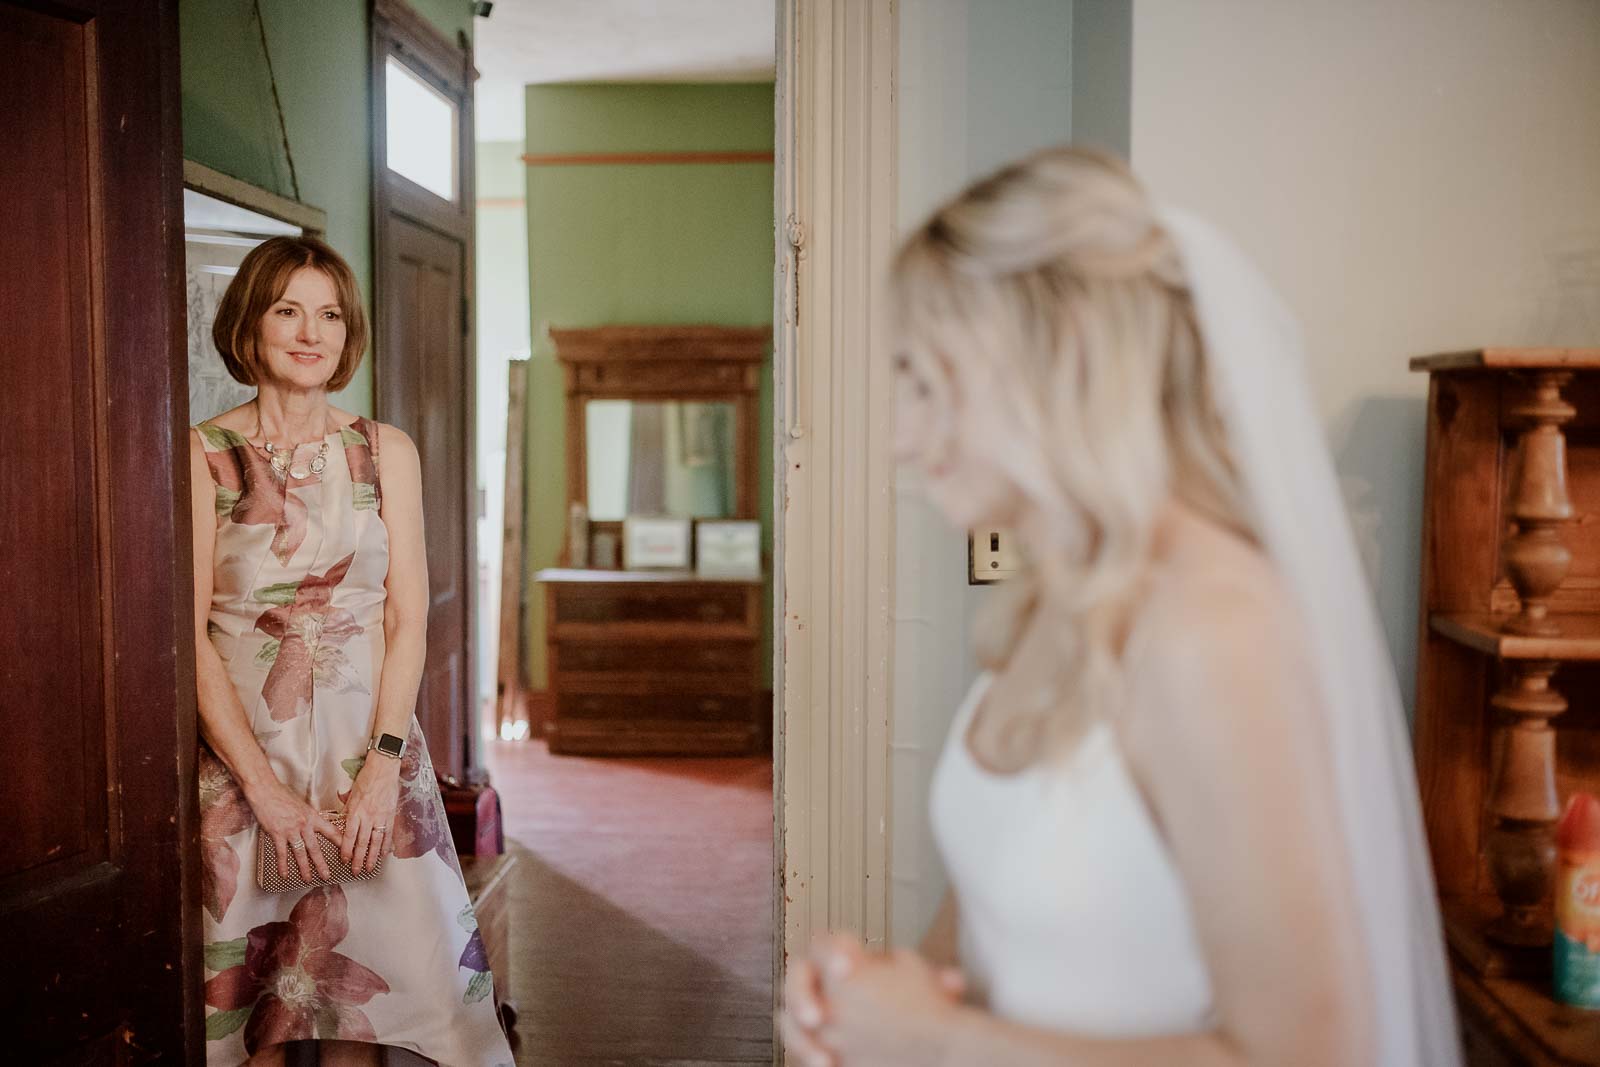 Mother of the bride looks adoringly at her daughter after fitting her veil